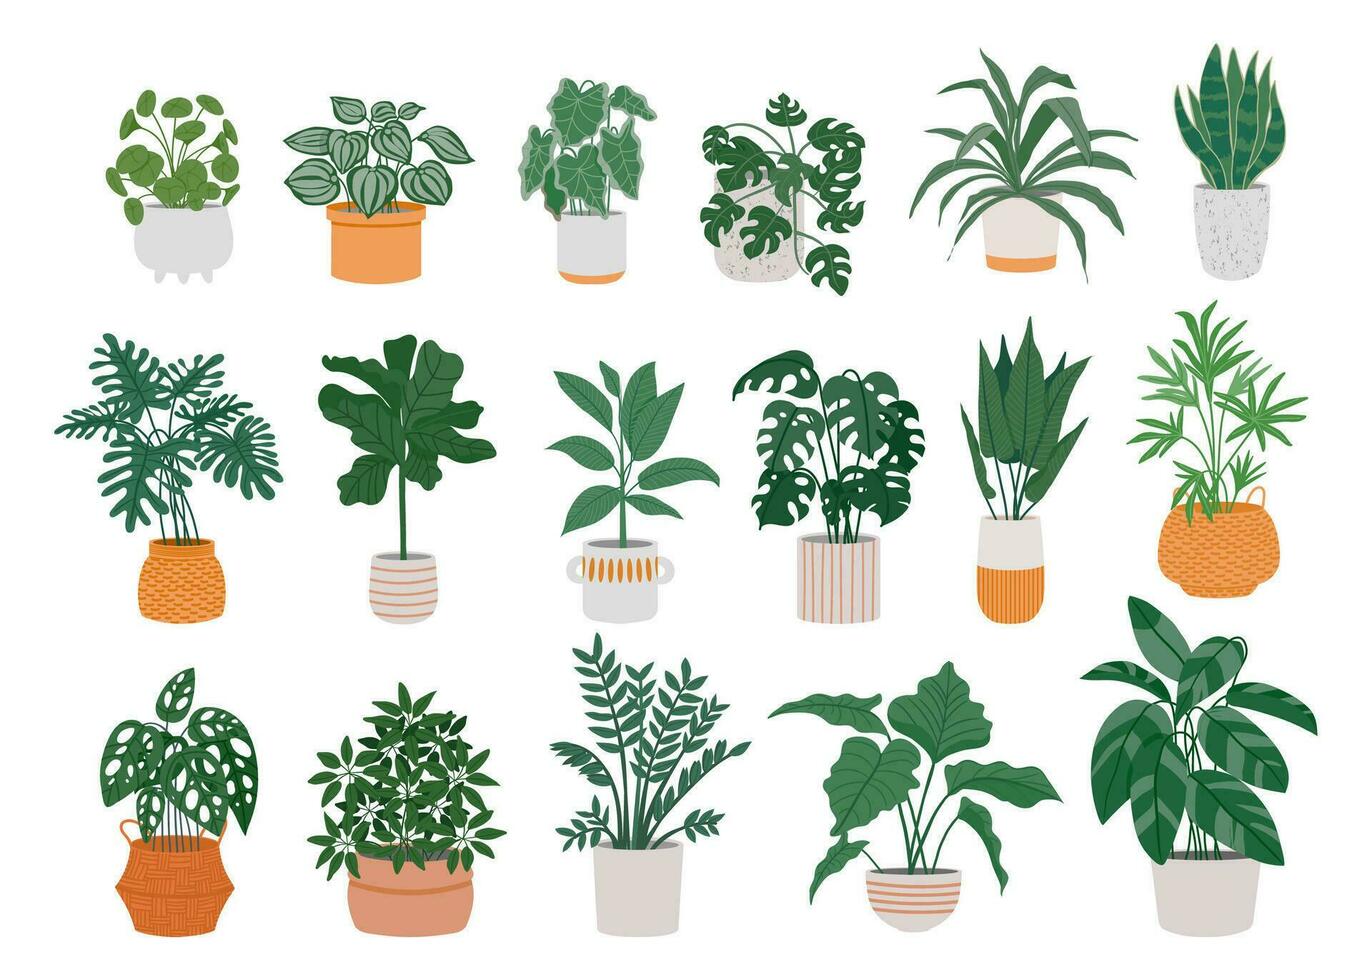 Home potted plants. Cartoon houseplants in pots for interior. Decorative monstera, palm in pot, ficus in basket, pilea in vase. Indoor green plants, foliage, leaves vector set